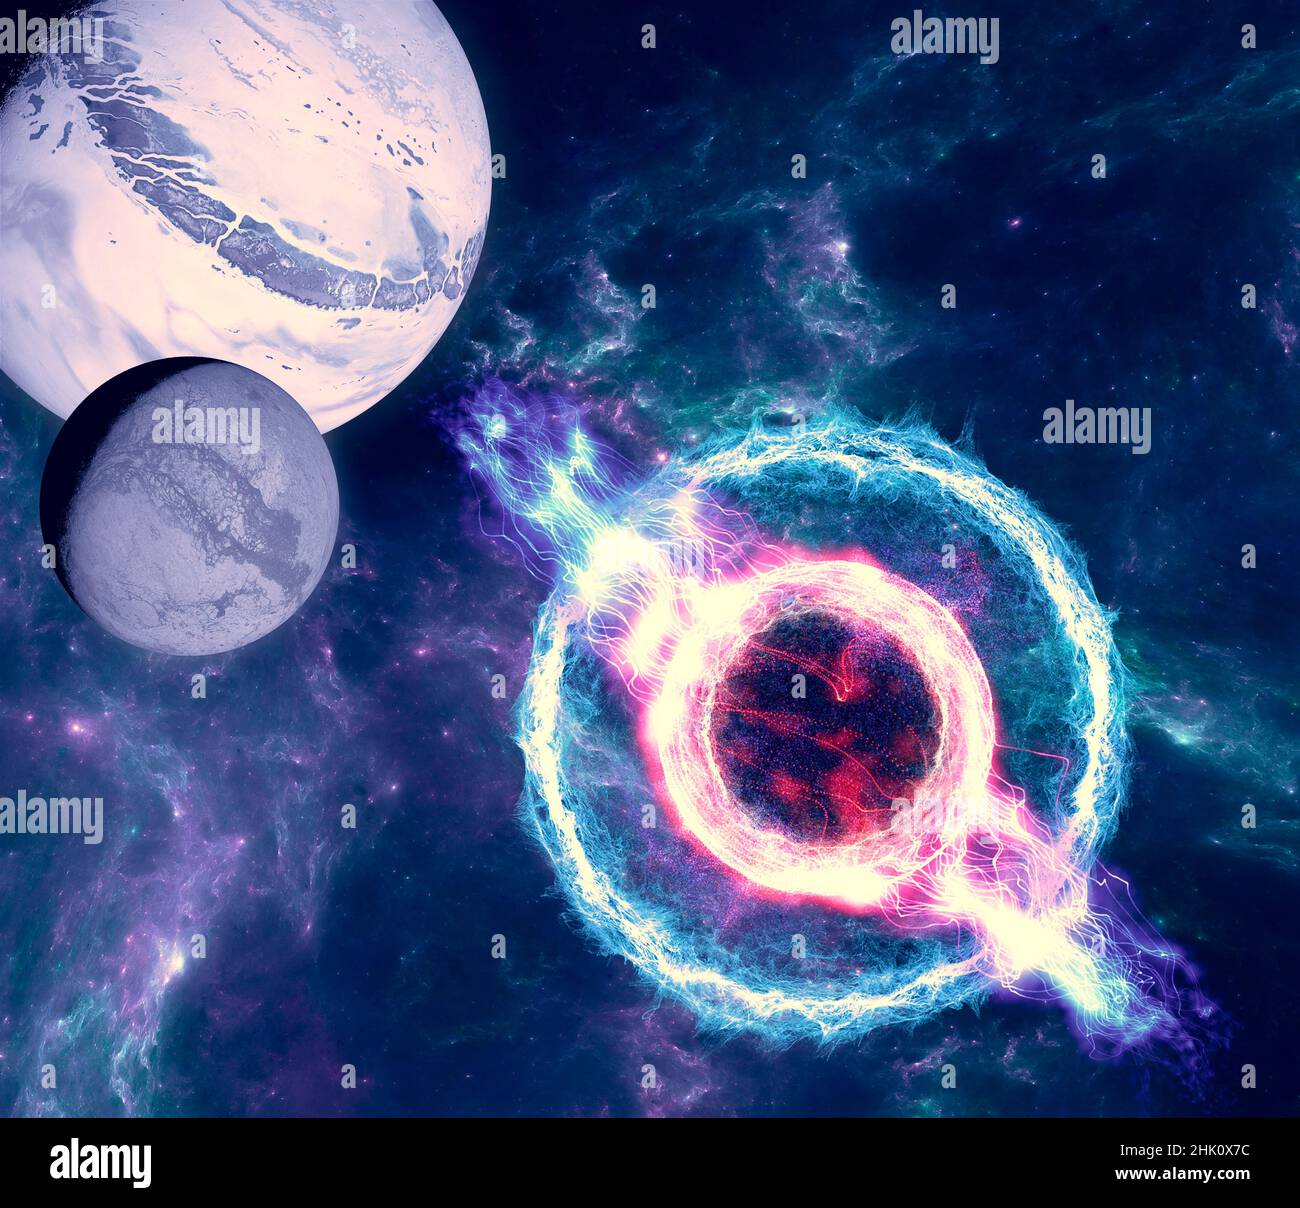 https://c8.alamy.com/comp/2HK0X7C/a-magnetar-is-a-type-of-neutron-star-believed-to-have-an-extremely-powerful-magnetic-field-stars-planets-and-universe-expansion-2HK0X7C.jpg